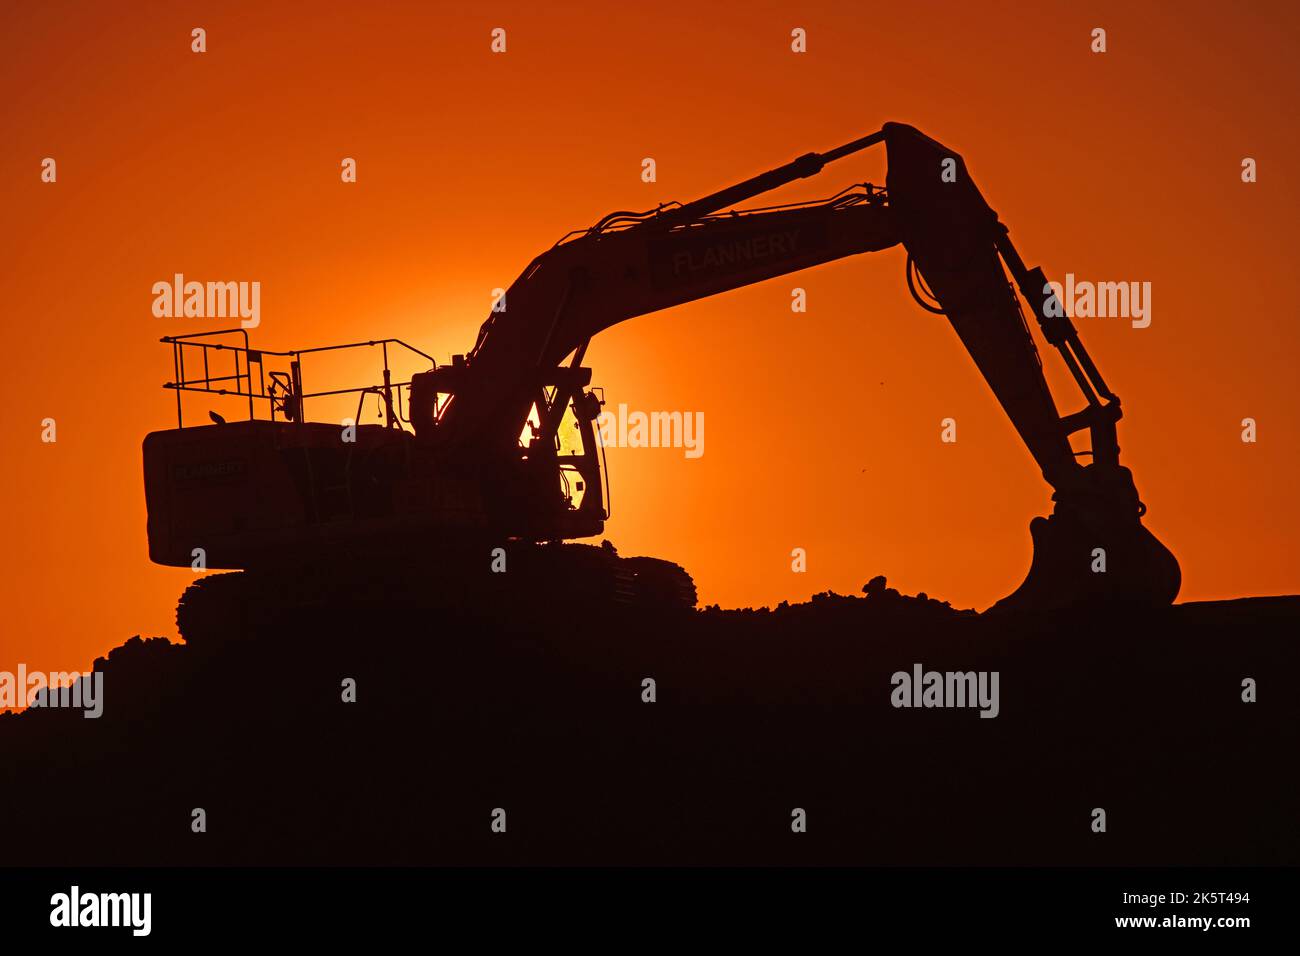 caterpillar digger working on site at sunset united kingdom Stock Photo